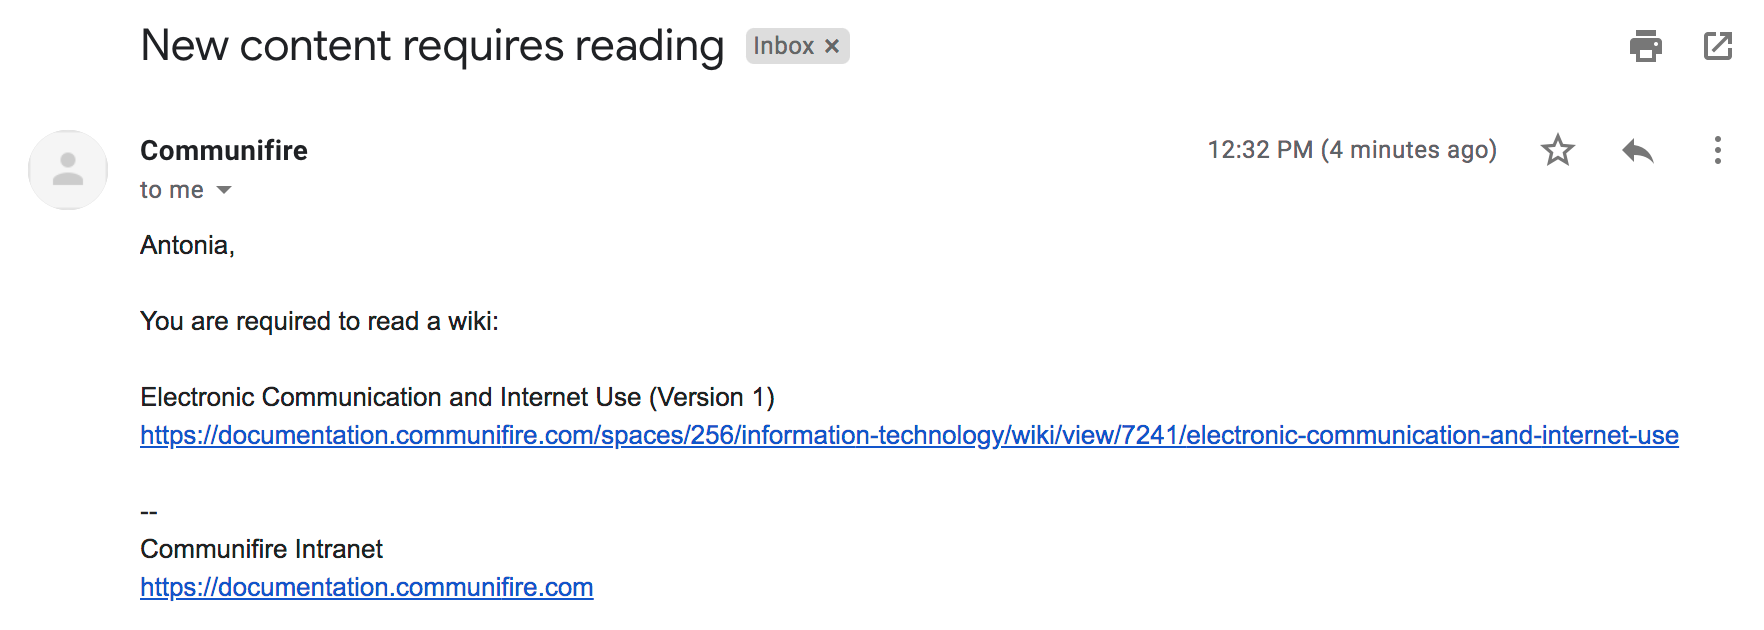 "New content requires reading" email